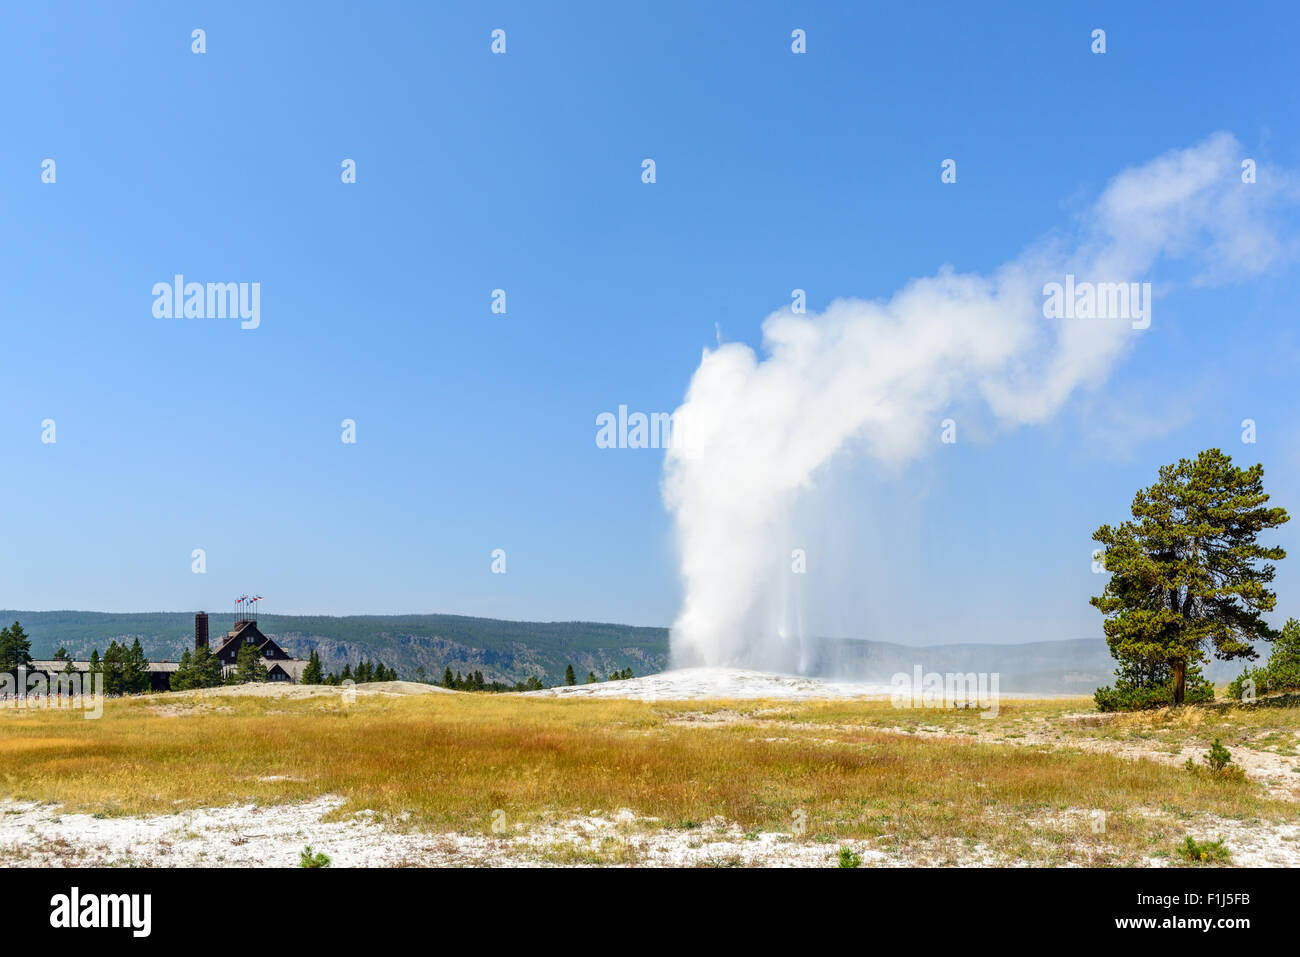 A crowd watches the Old Faithful geyser erupt during a summer visit to Yellowstone National Park Stock Photo